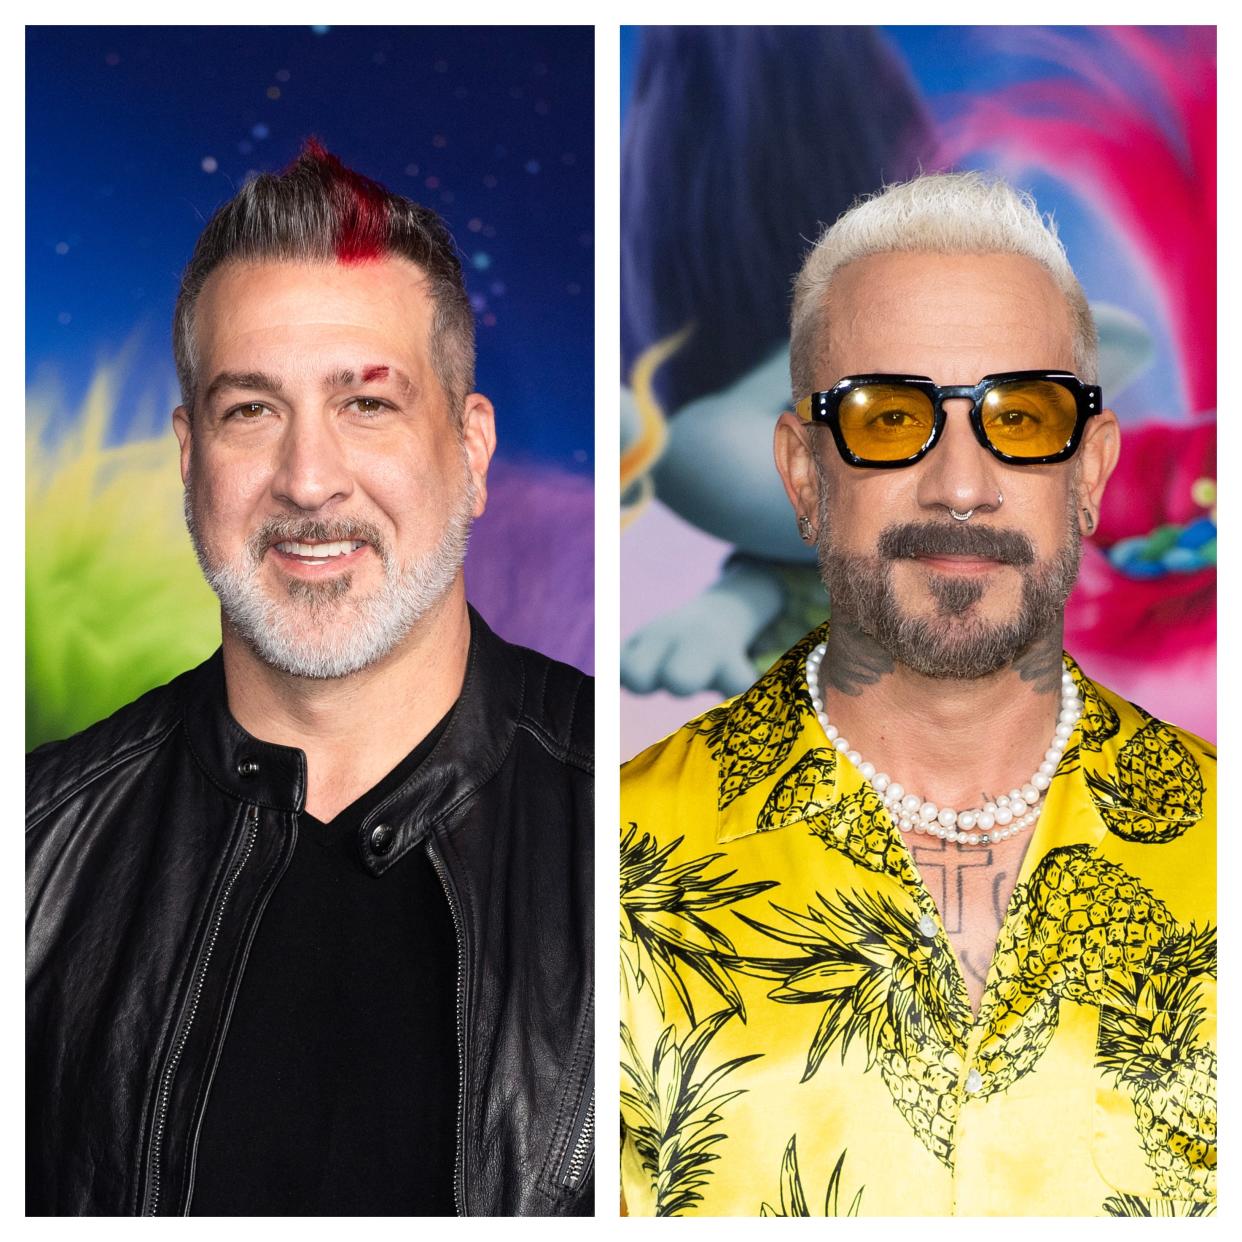 Joey Fatone (left) and AJ McLean will combine their boy band pedigree for a joint tour in spring 2024.